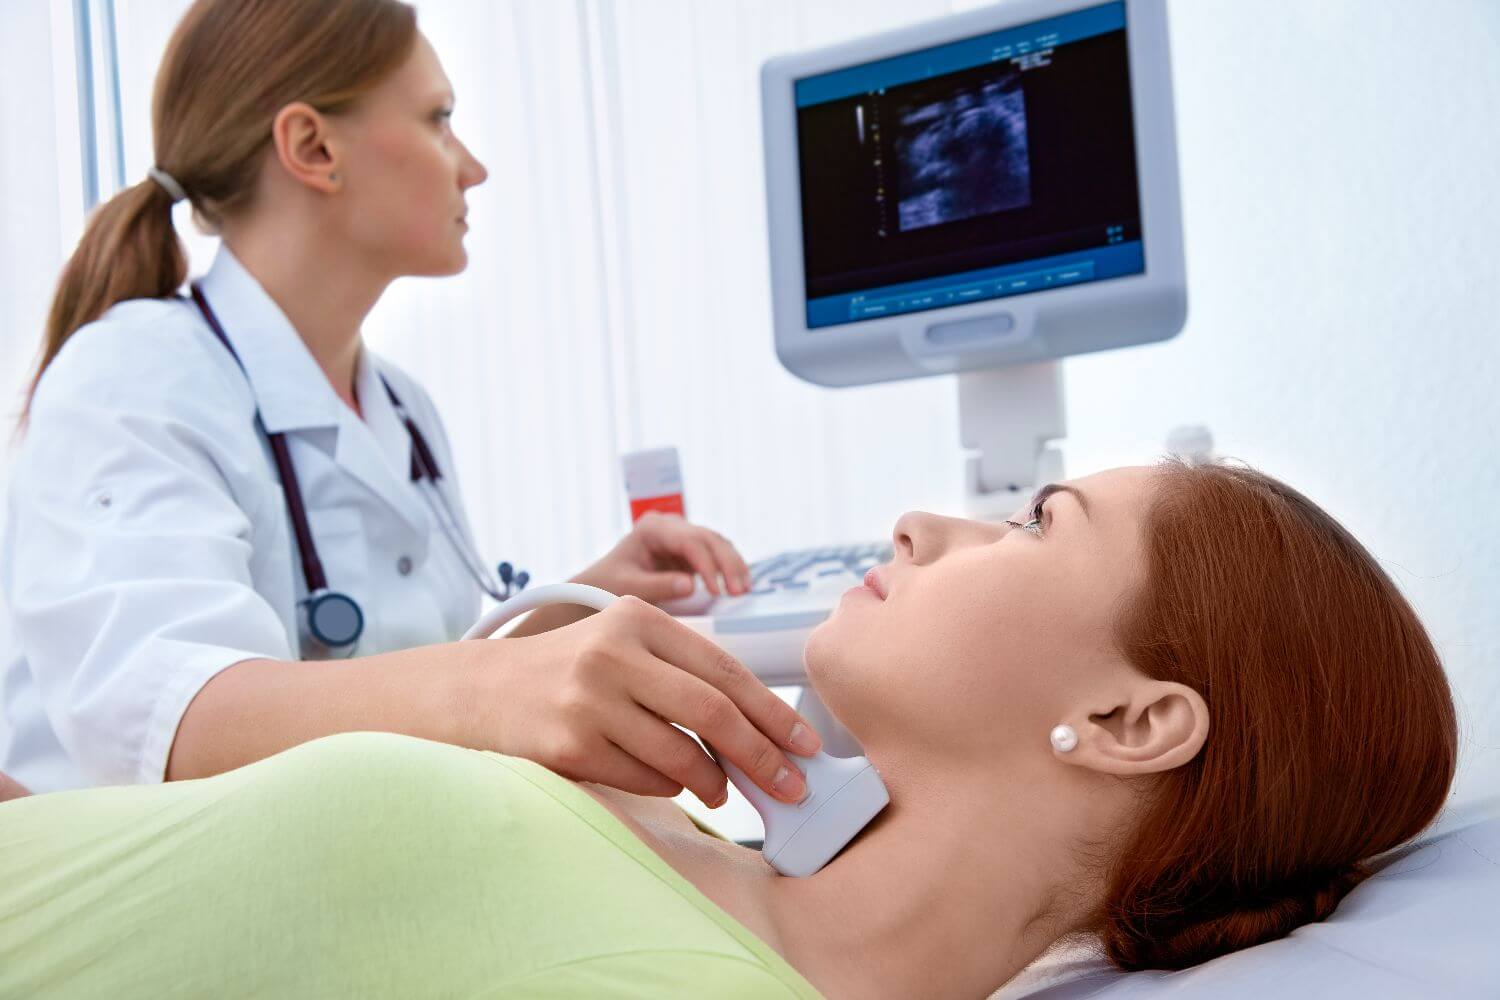 woman getting medical imaging done on her throat